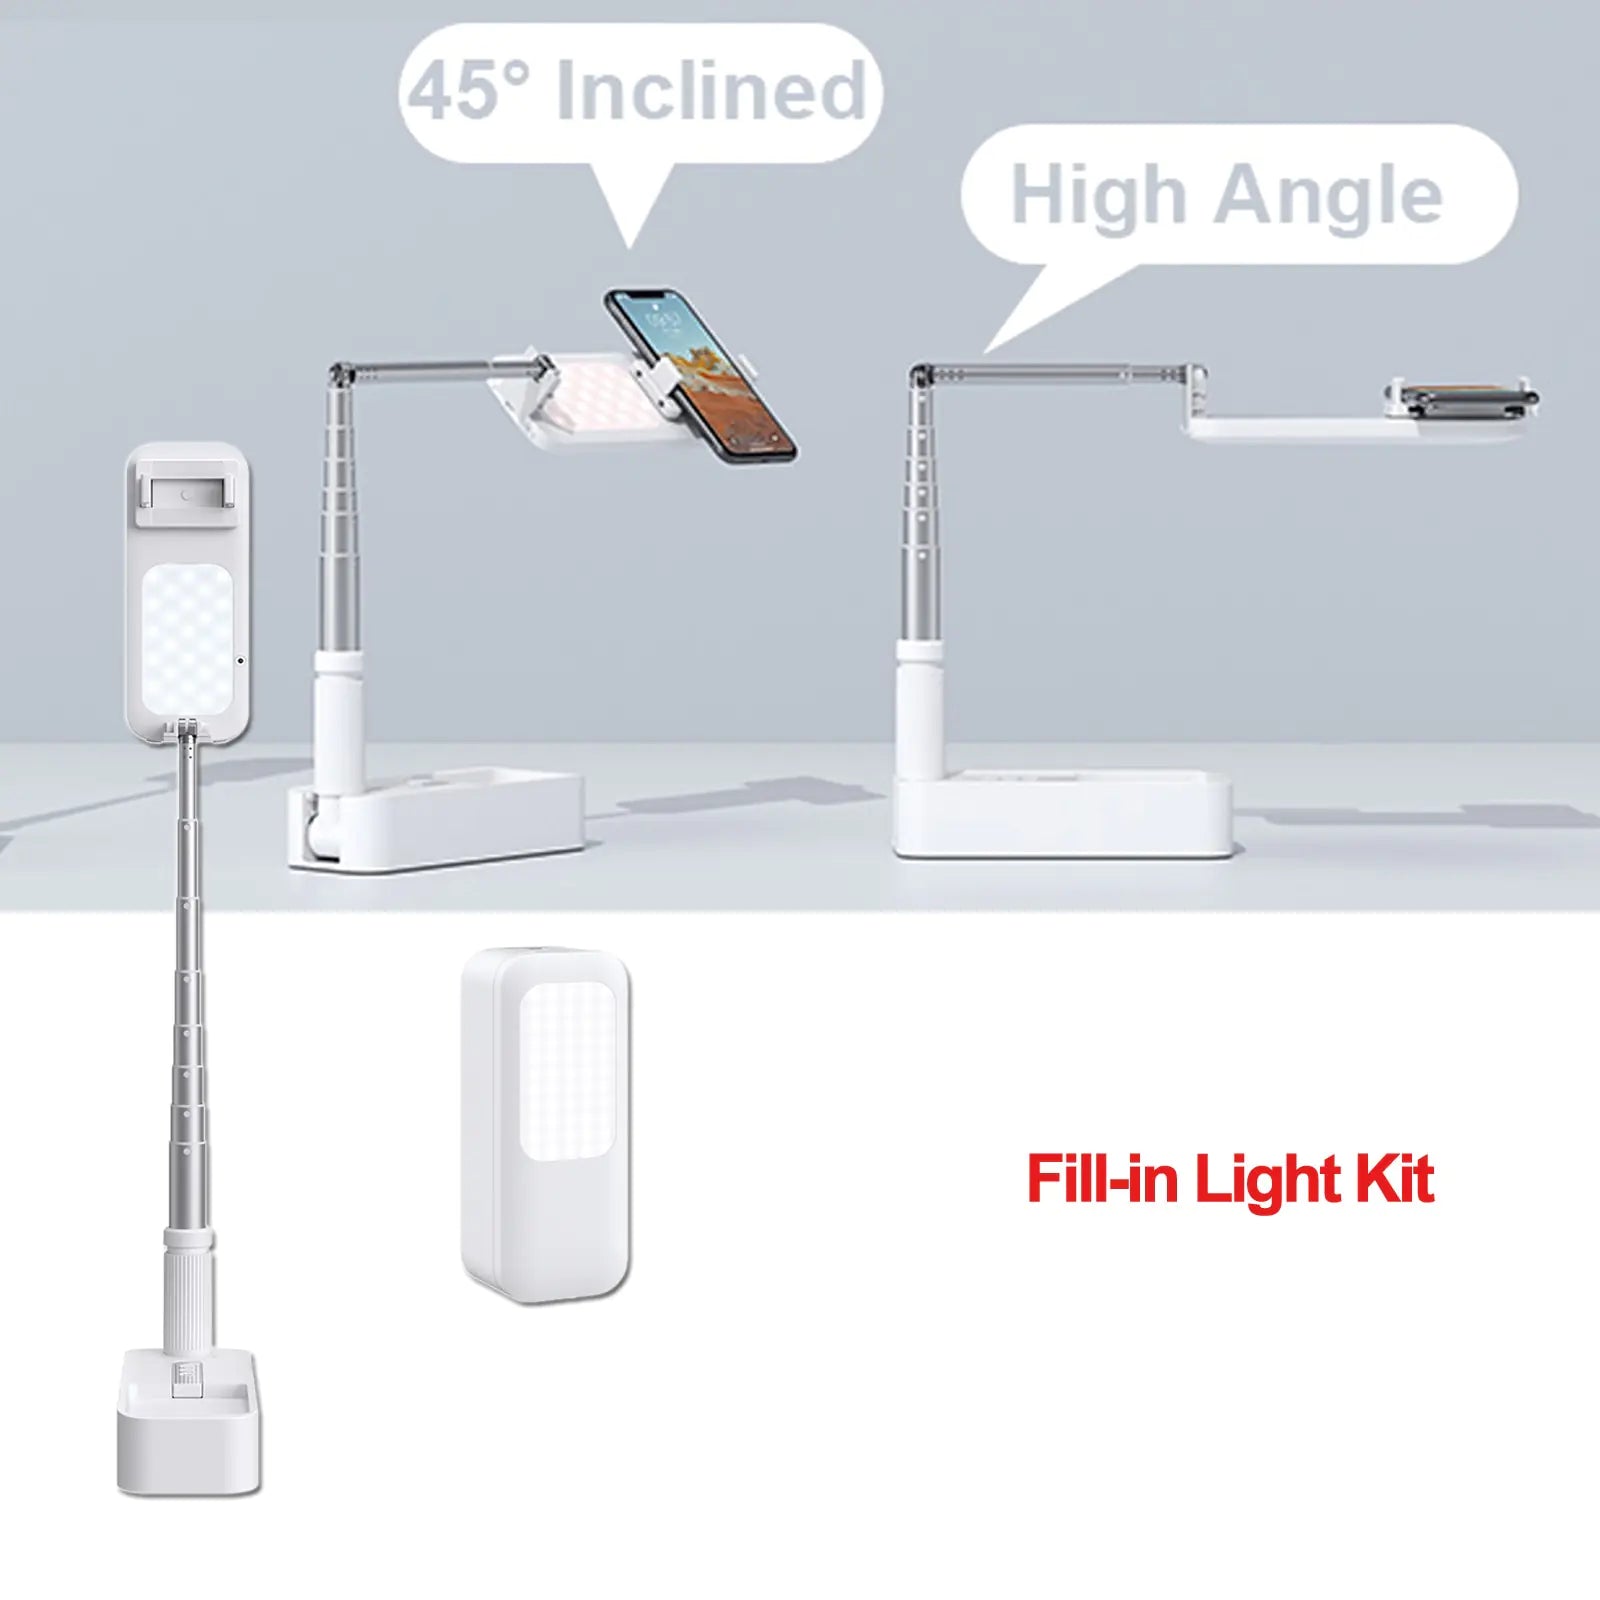 Fill-in Light Kit Smartphone Stand